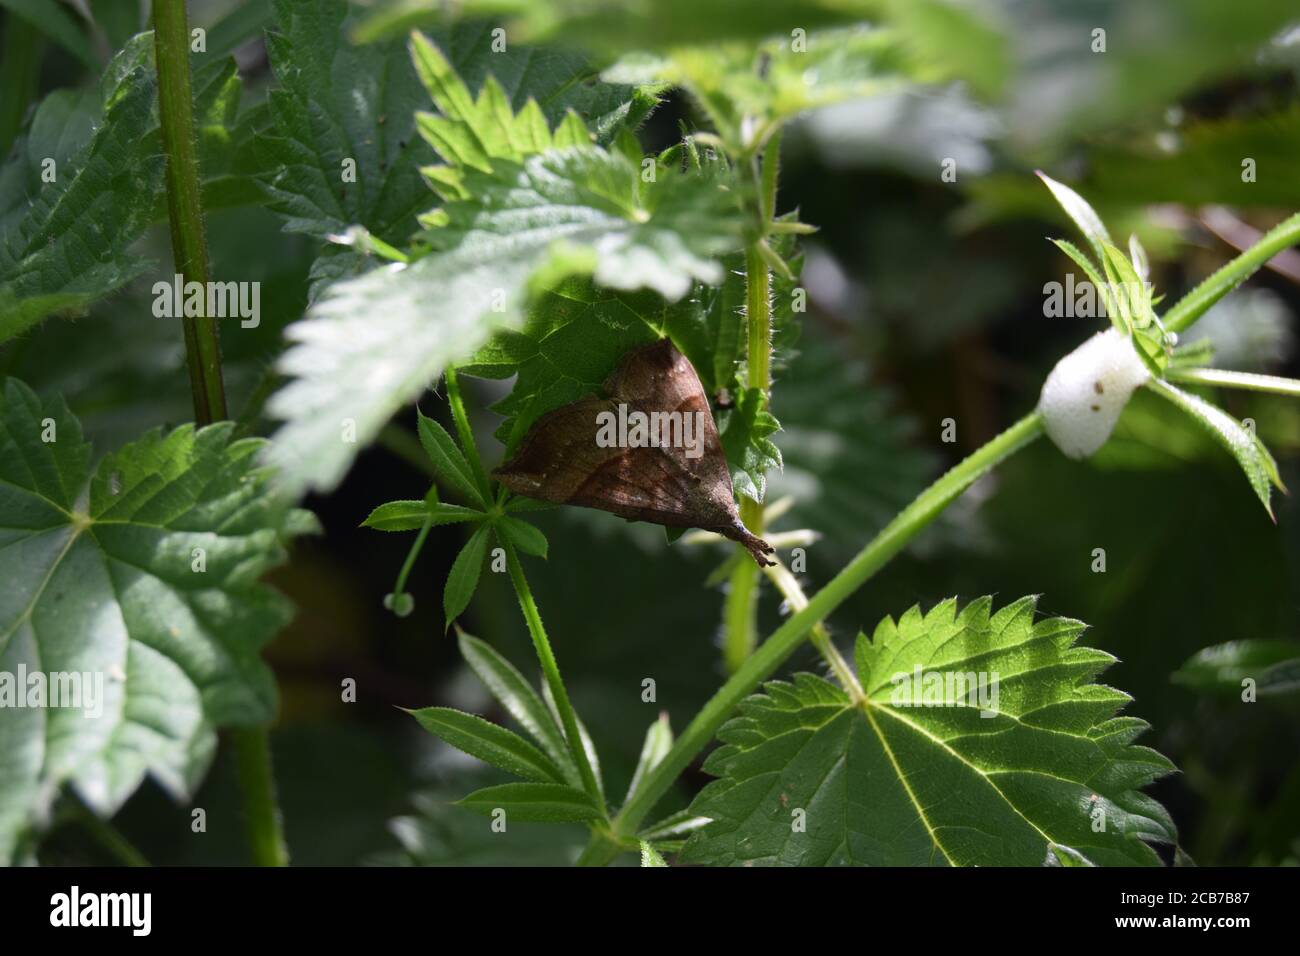 The Snout moth on nettle Stock Photo